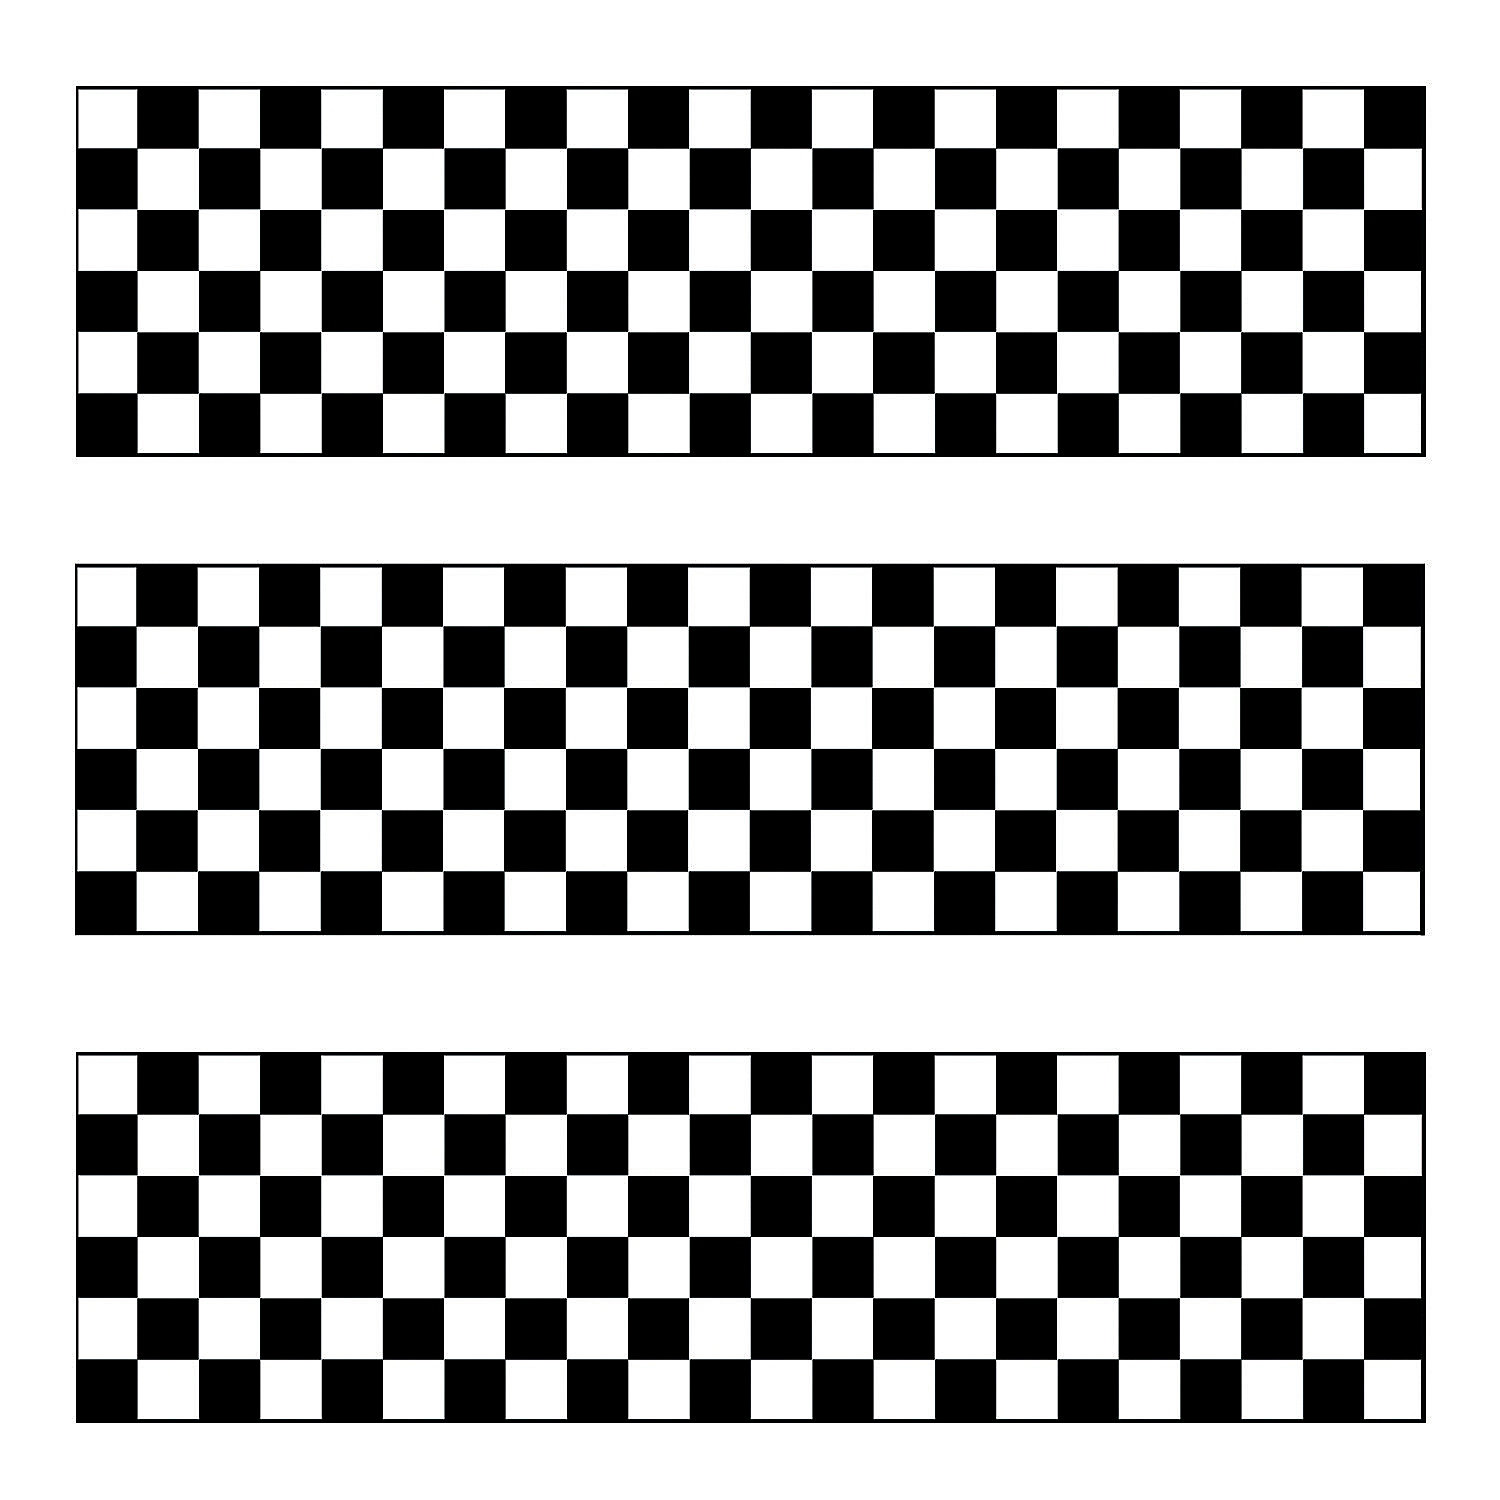 Trace The Pattern: Race Cars To Checkered Flag